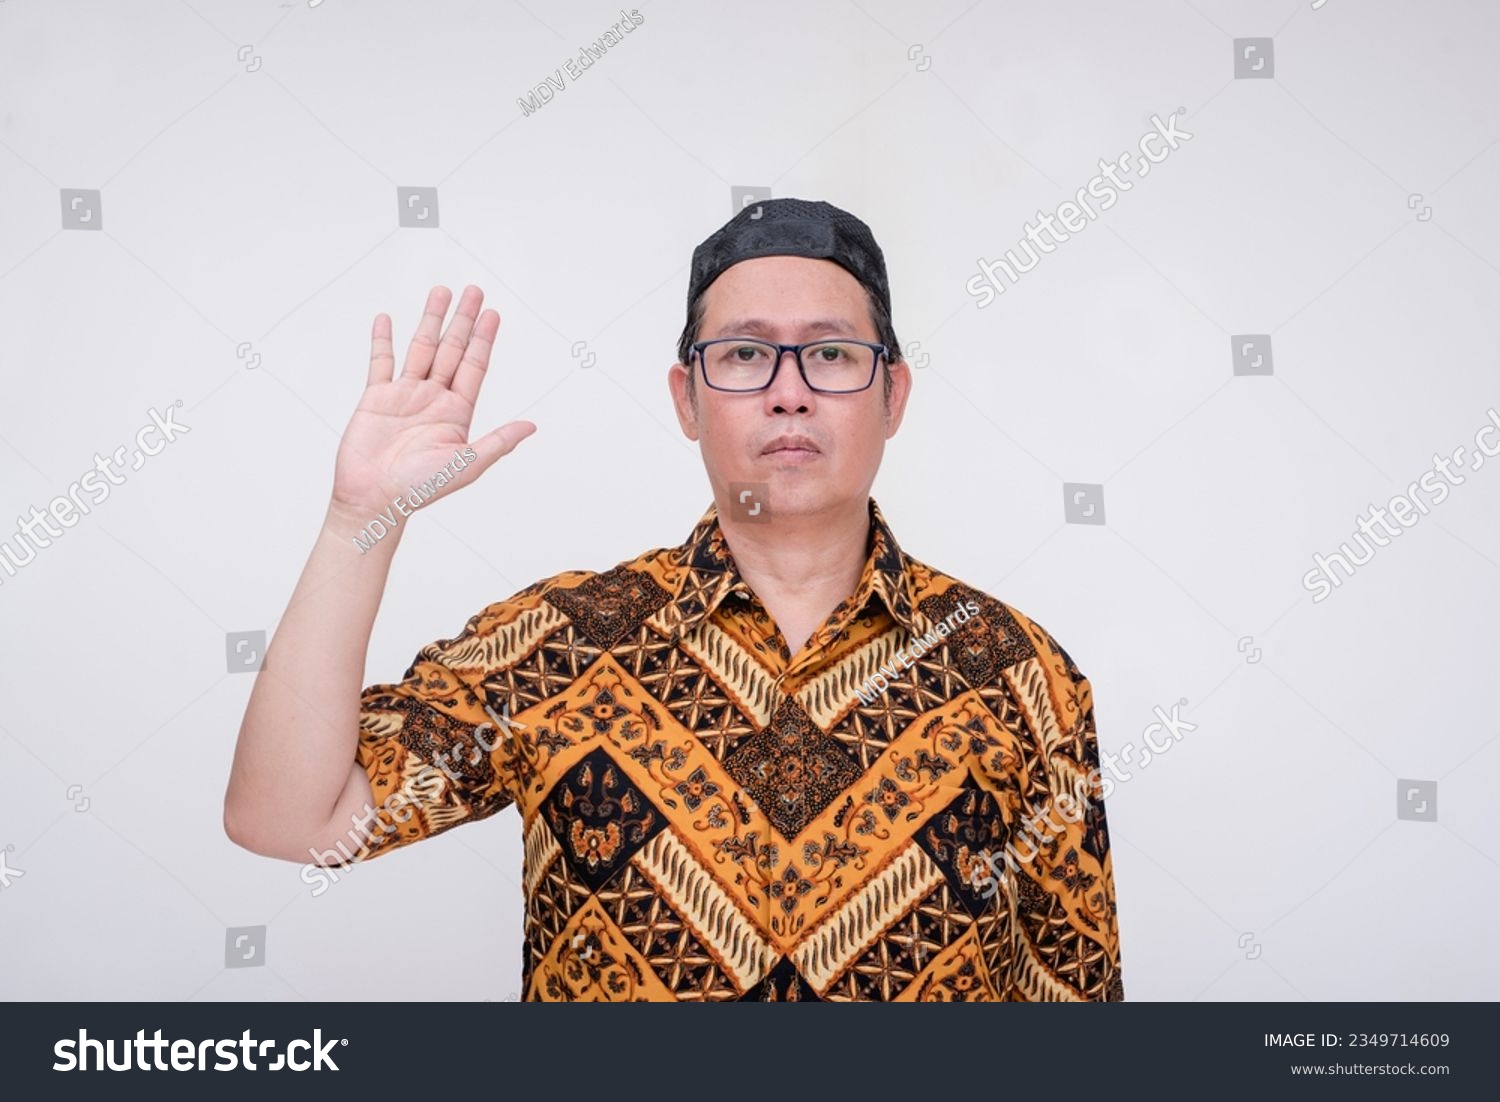 A southeast asian man pledges loyalty and makes an oath. Wearing a batik shirt and songkok skull cap with hand on chest. A middle aged muslim male in his 40s. Isolated on a white background. #2349714609